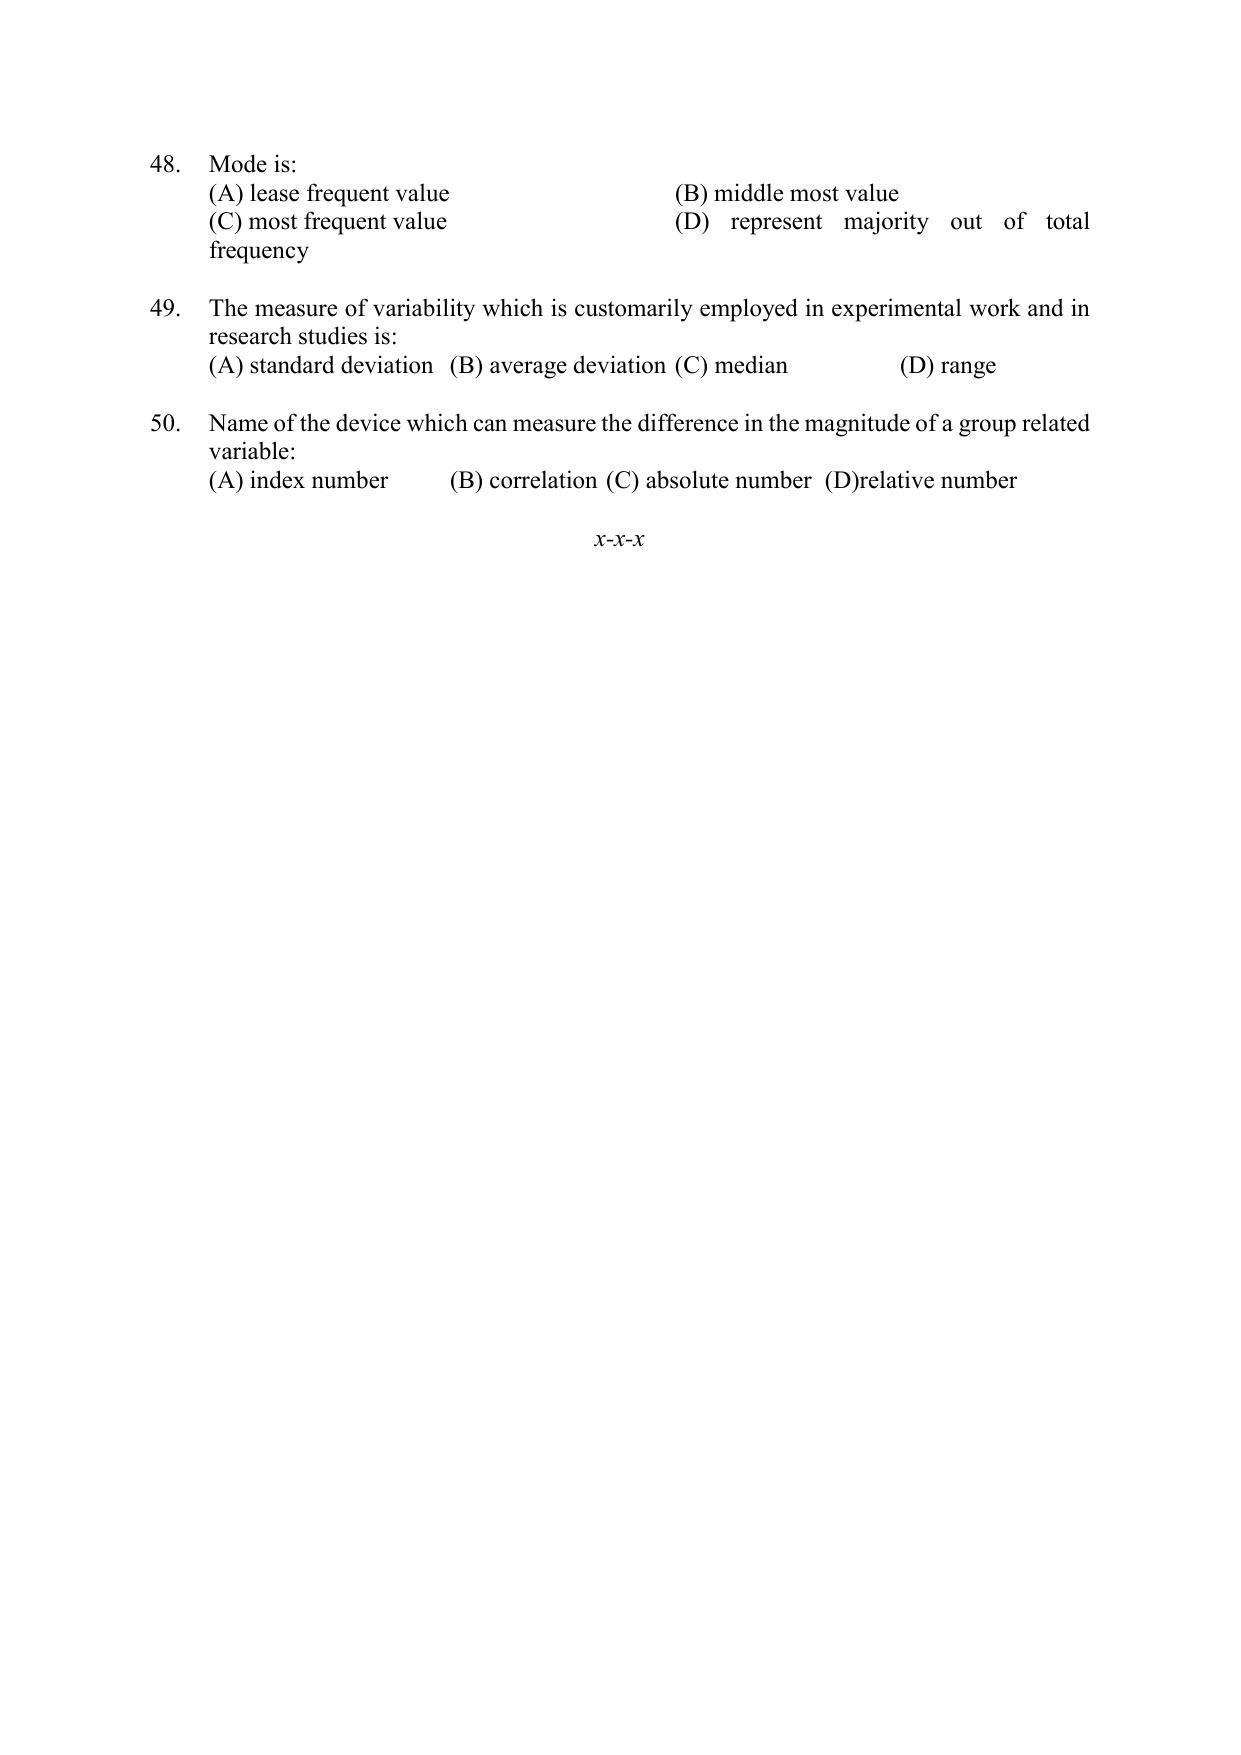 PU MPET Ancient Indian History & Archeology 2022 Question Papers - Page 43